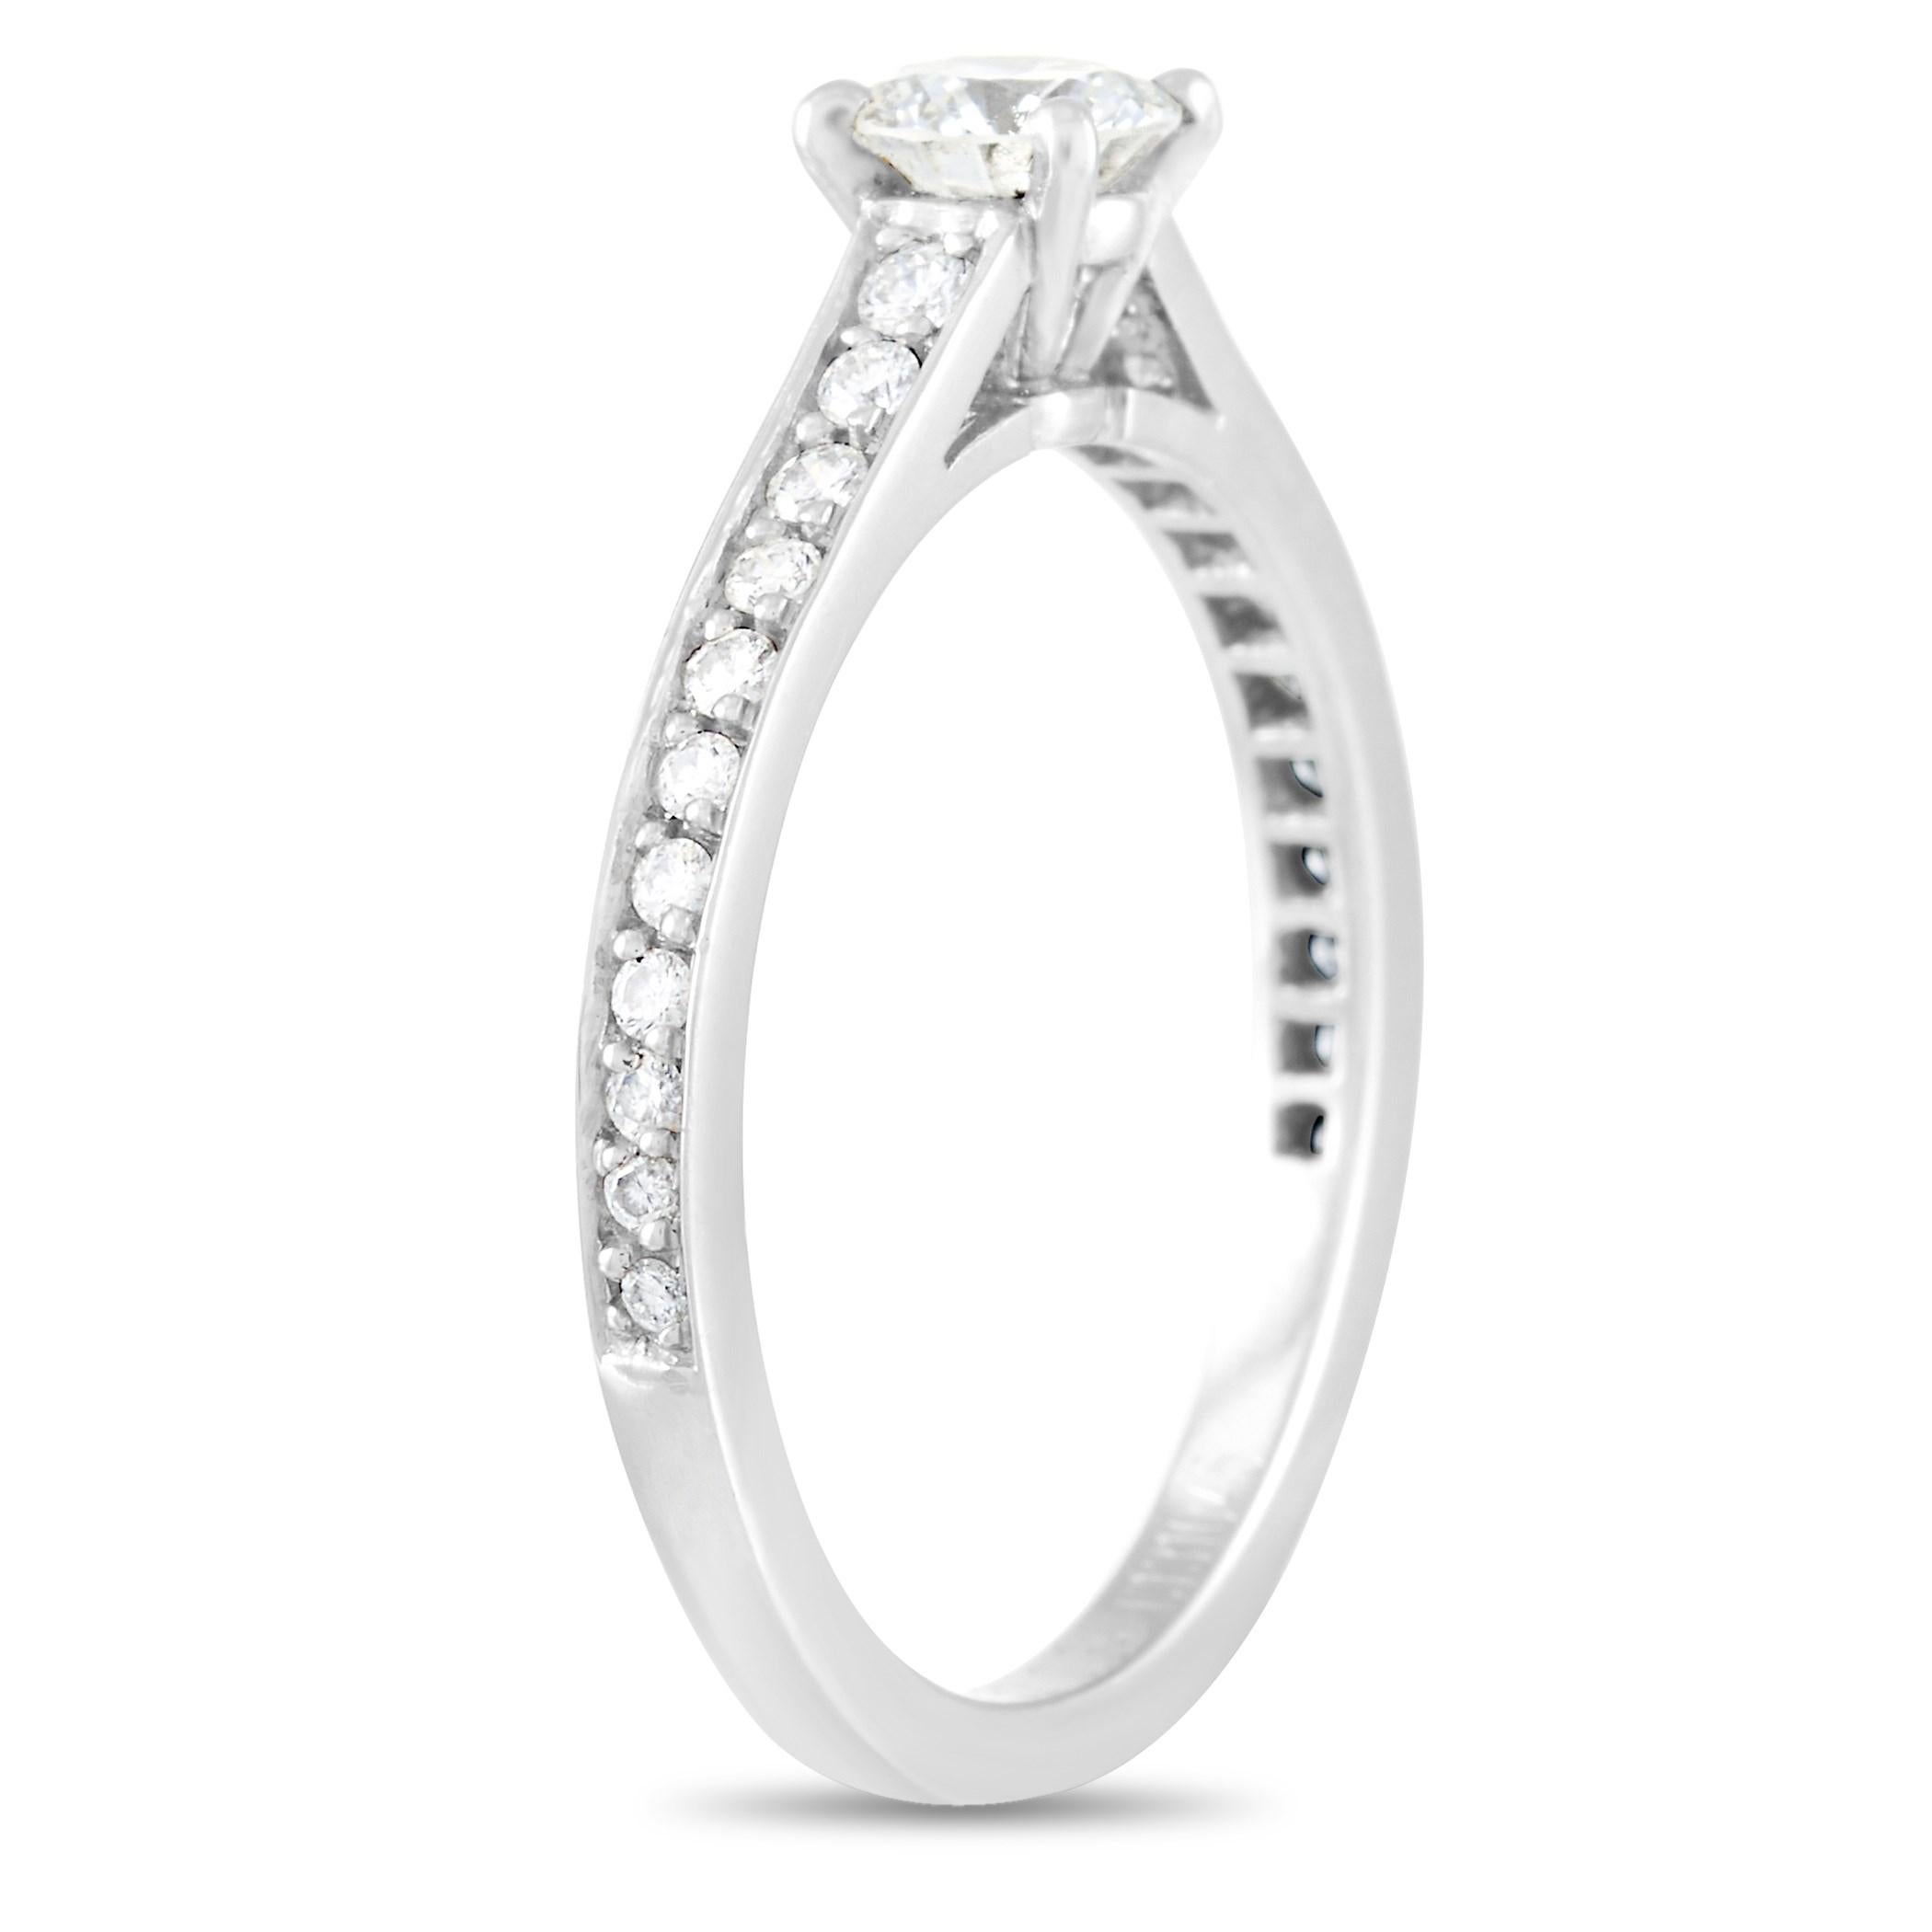 This Cartier Platinum 0.49 ct Diamond Solitaire Engagement Ring is made with platinum and features a 0.34 carat round-cut solitaire center diamond held by four prongs and flanked by 0.15 carats of round-cut diamonds set in the band. The band